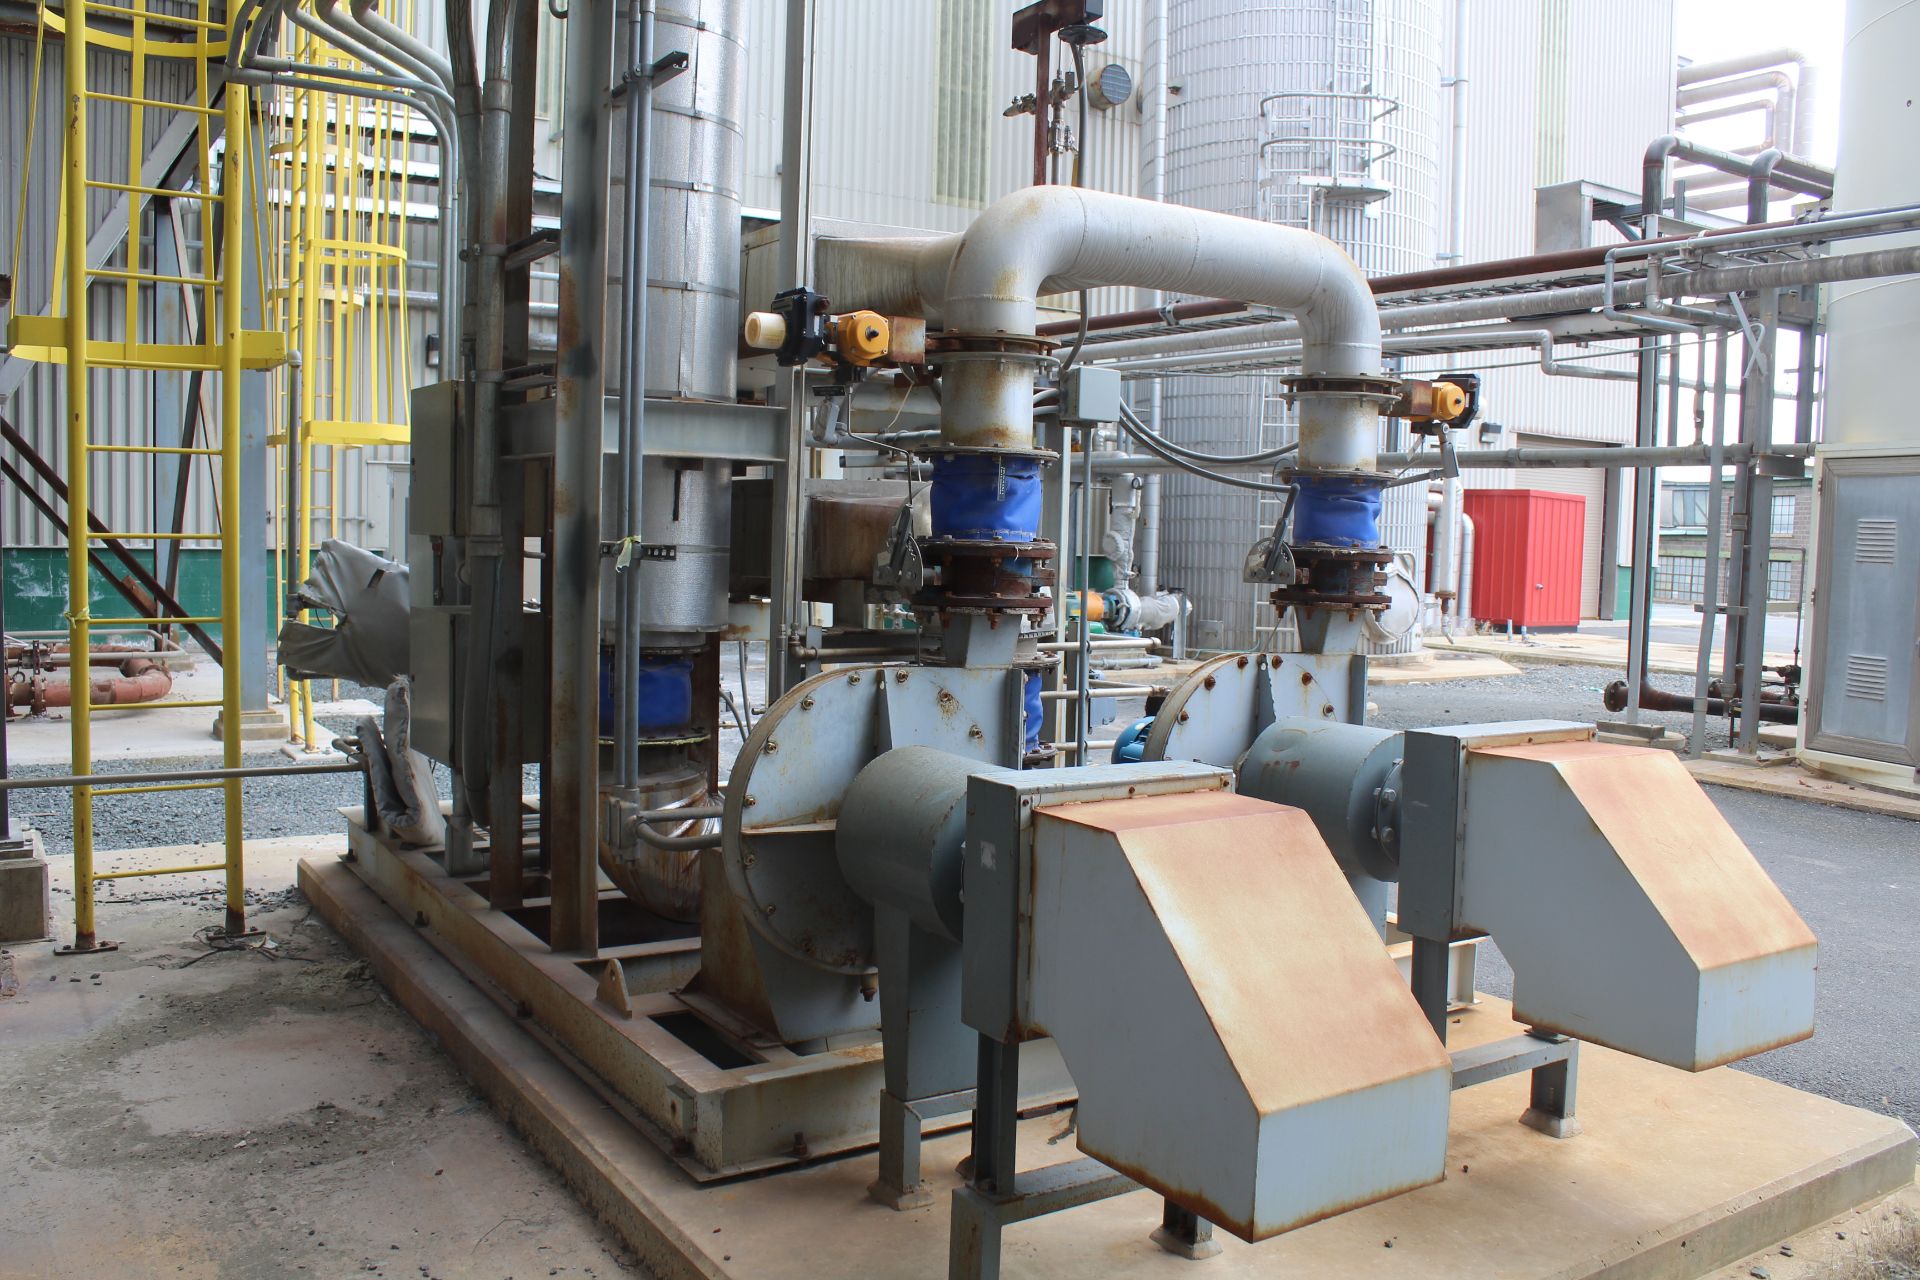 Product Dryer Skid | Rig Fee: $500 - Image 3 of 4